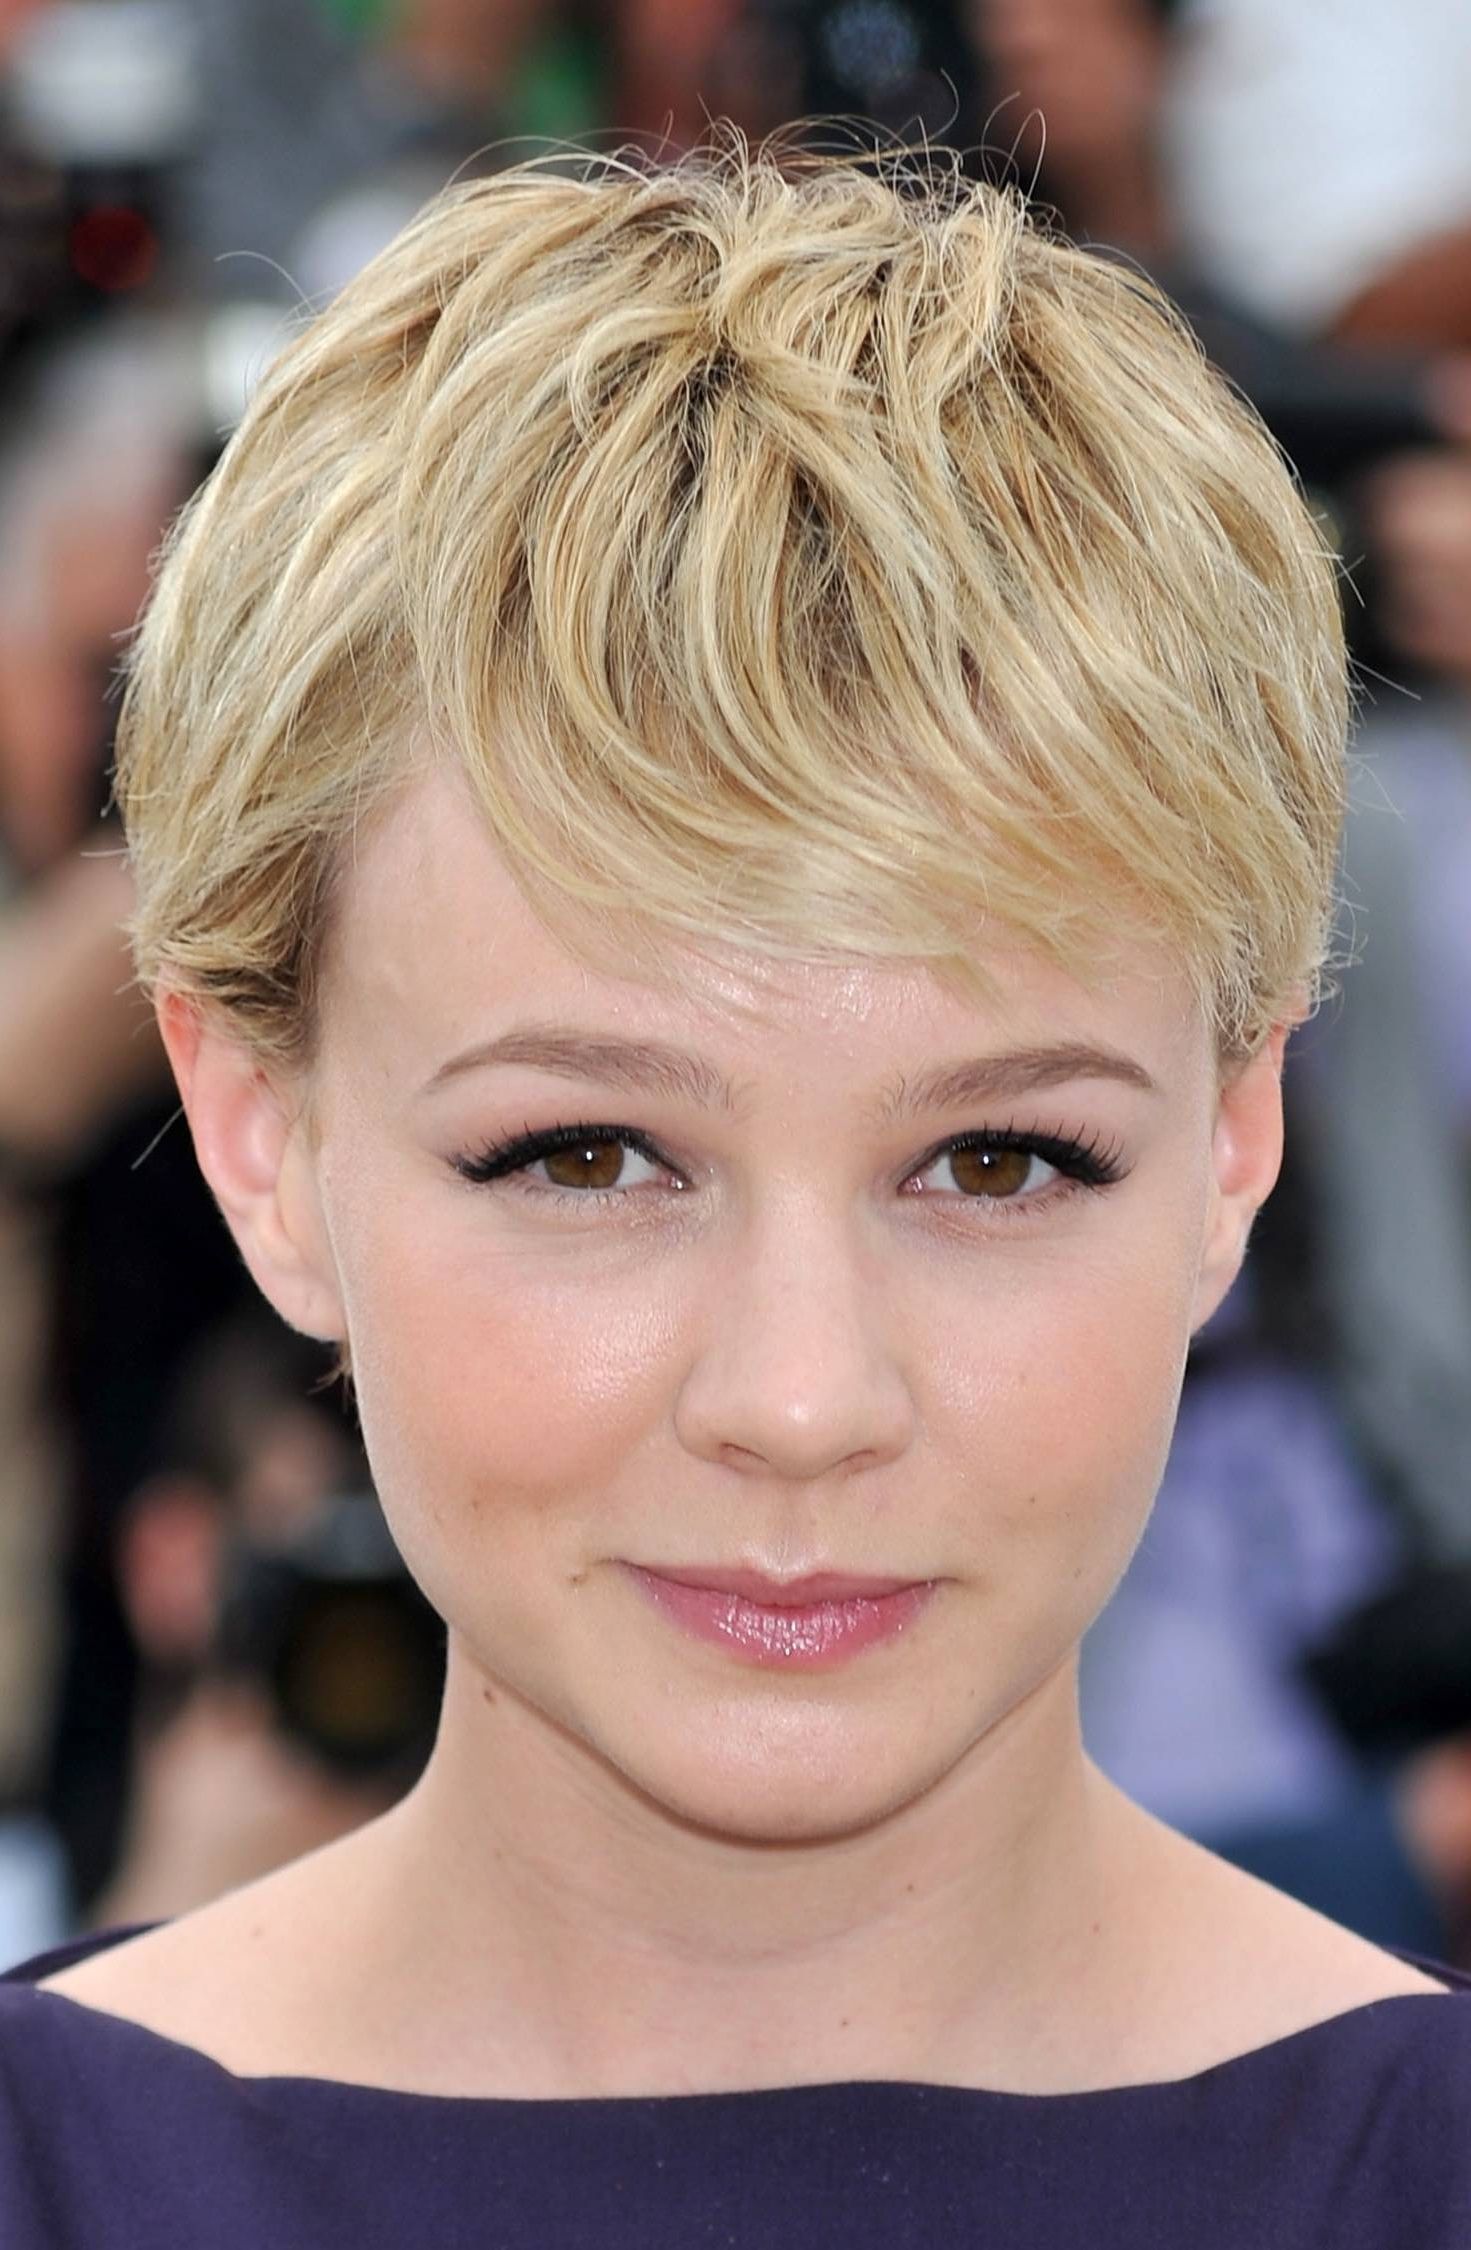 Short Pixie Cuts 2013 – Hairstyle For Women & Man Inside 2018 Kids Pixie Hairstyles (View 14 of 15)